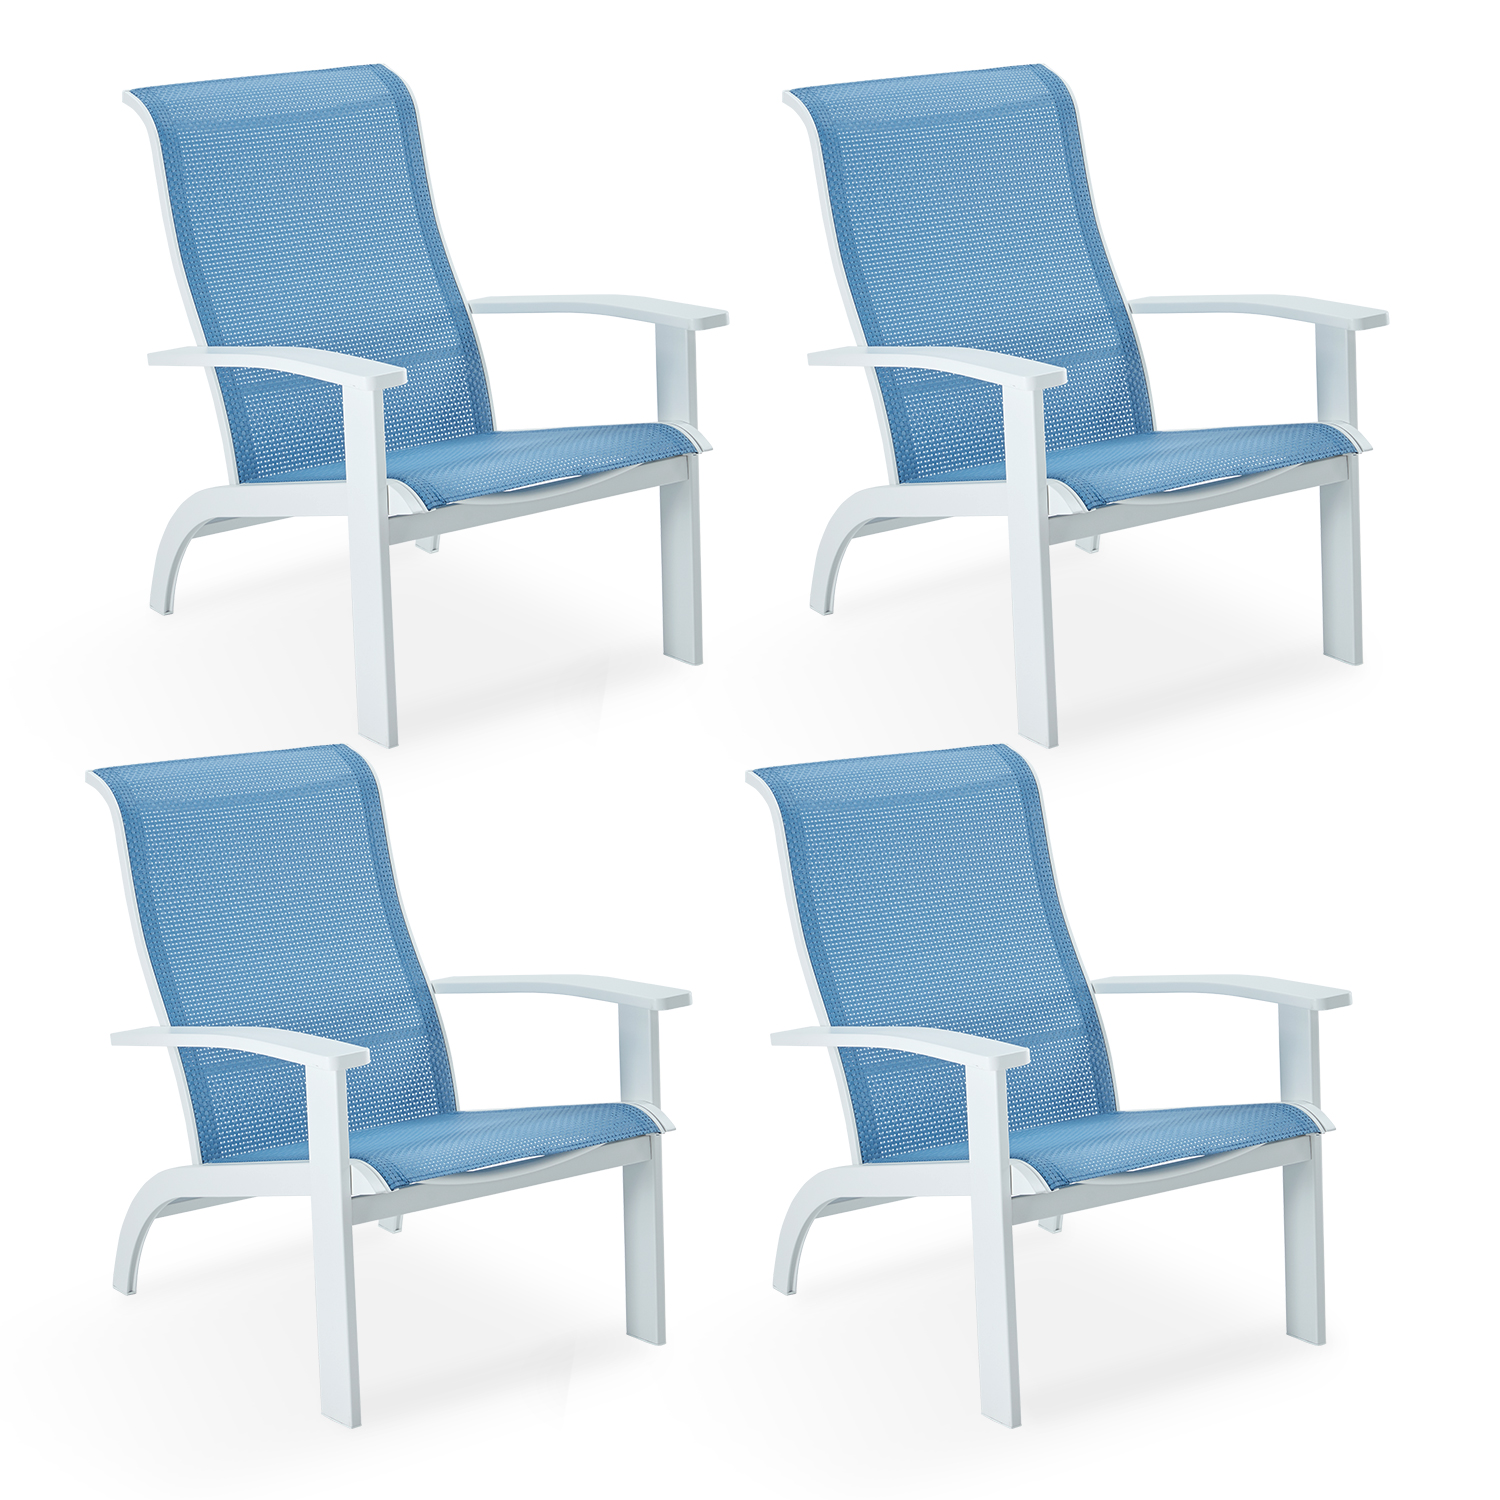 VICLLAX Outdoor Adirondack Chair Set of 4, Patio Chair for Lawn Garden, All Weather Outdoor Lounge Chairs, blue and white - image 1 of 5